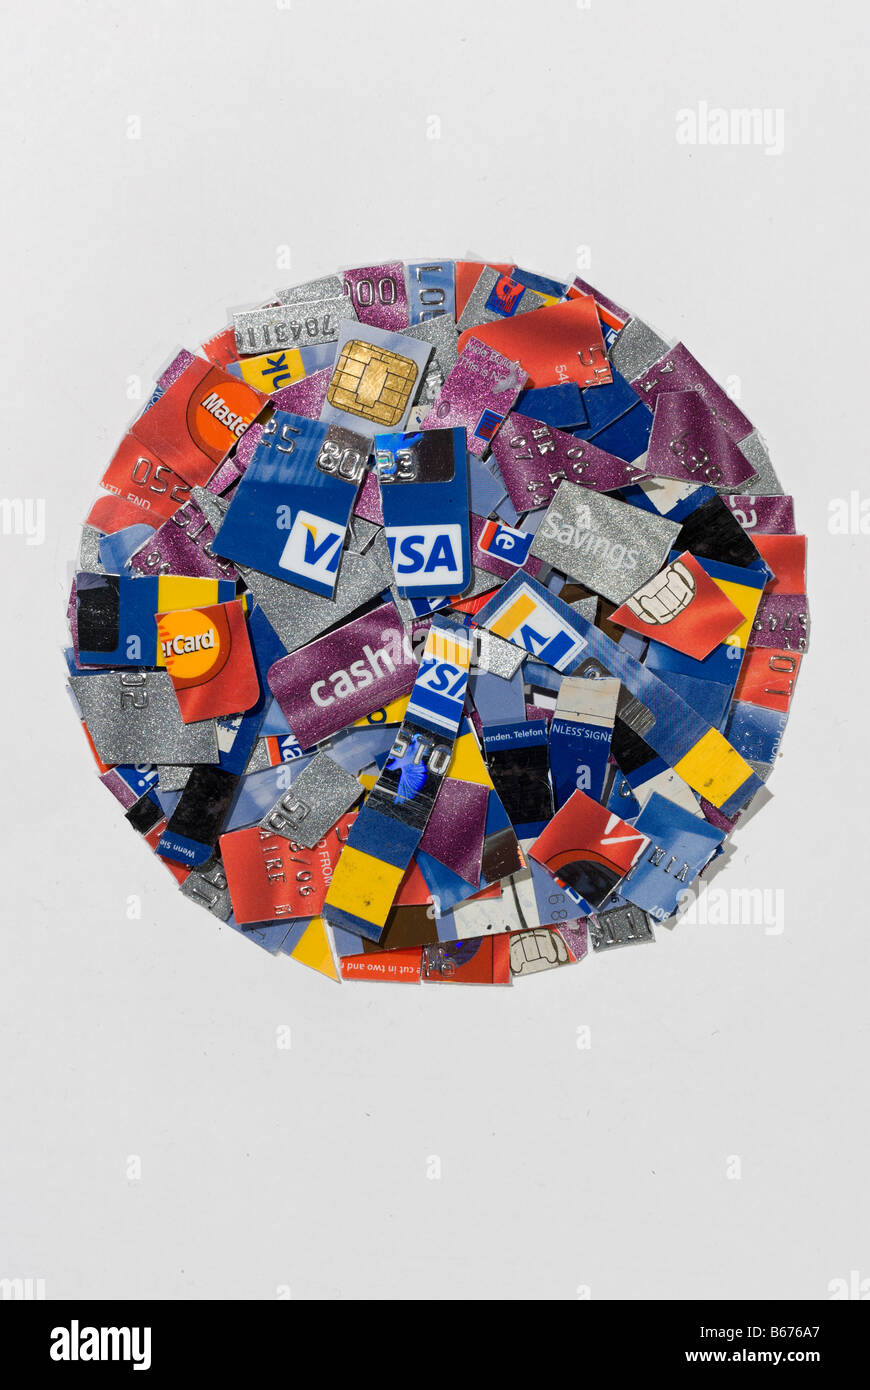 Circular montage of cut up assorted bank credit cards Stock Photo